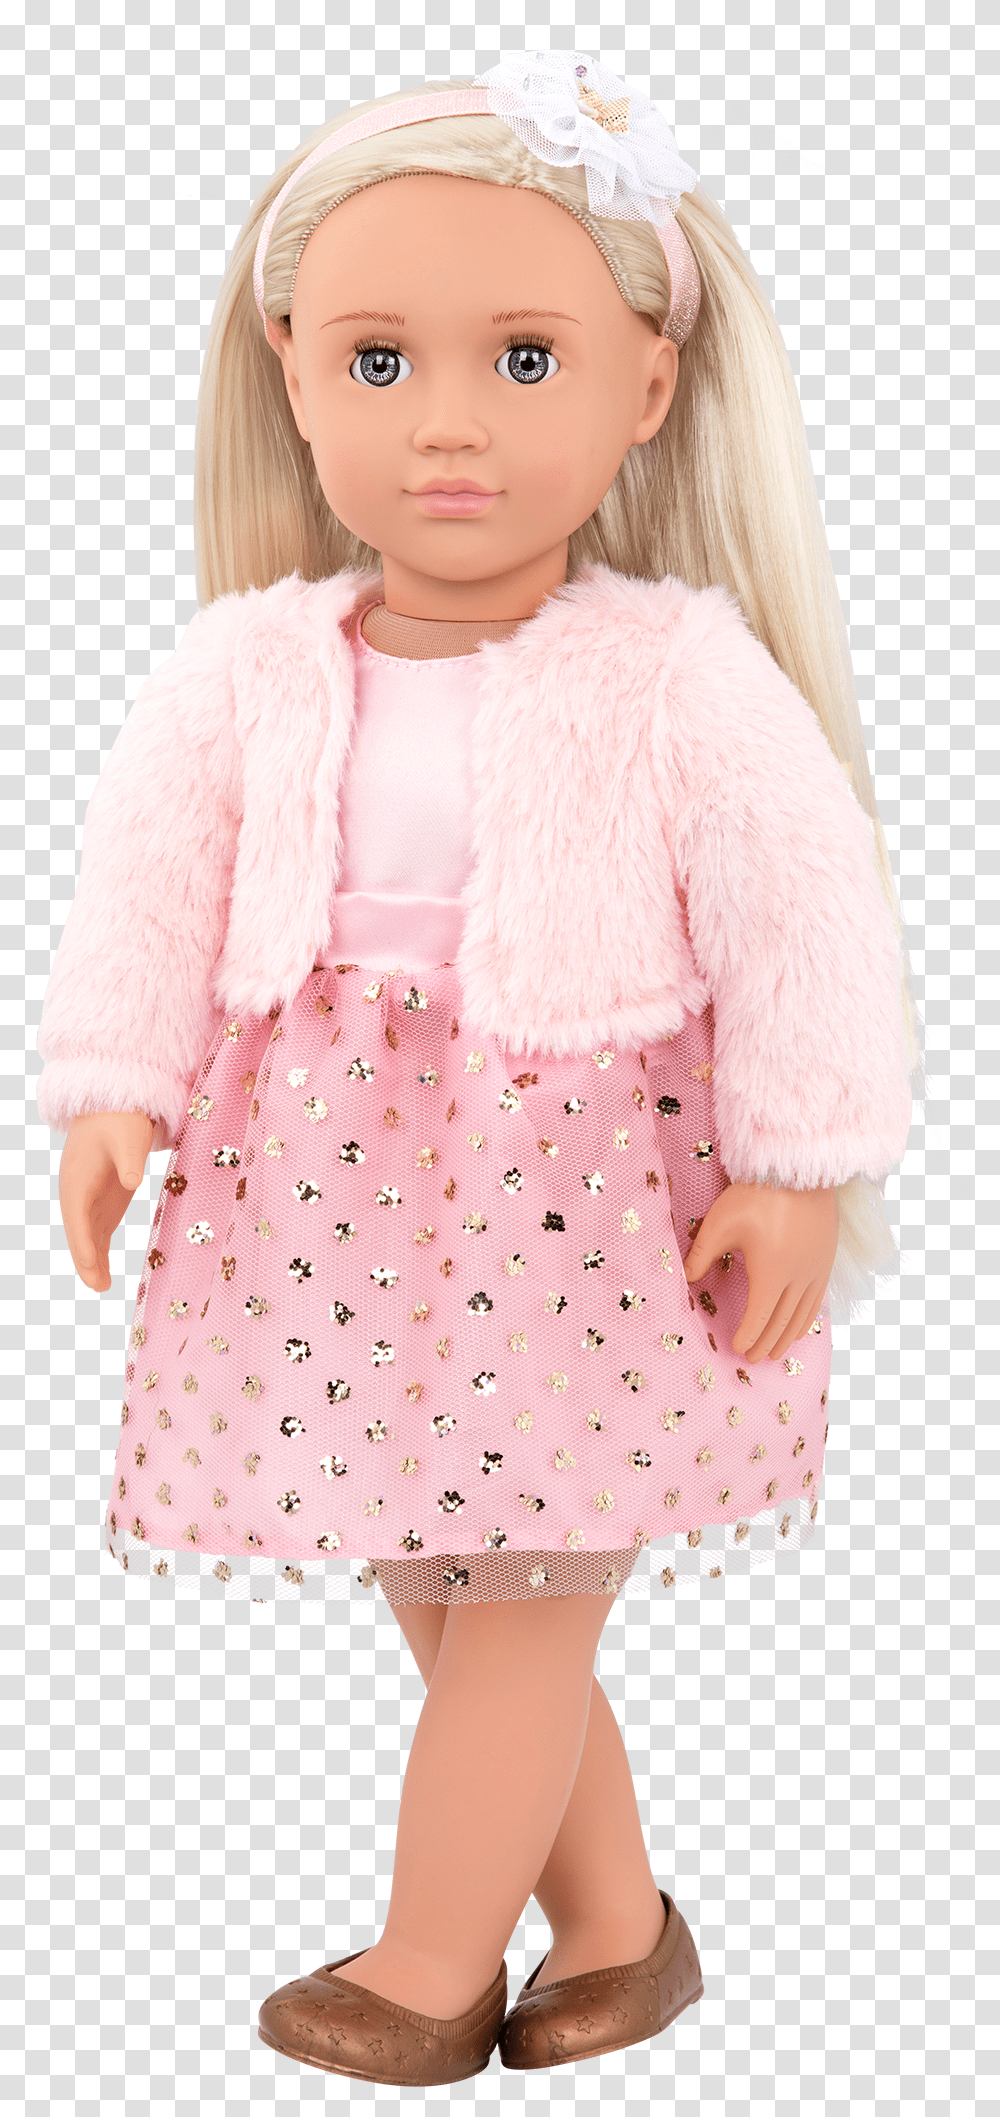 Millie Regular 18 Inch Doll With Legs Crossed Generation Doll Milly, Apparel, Coat, Fur Transparent Png